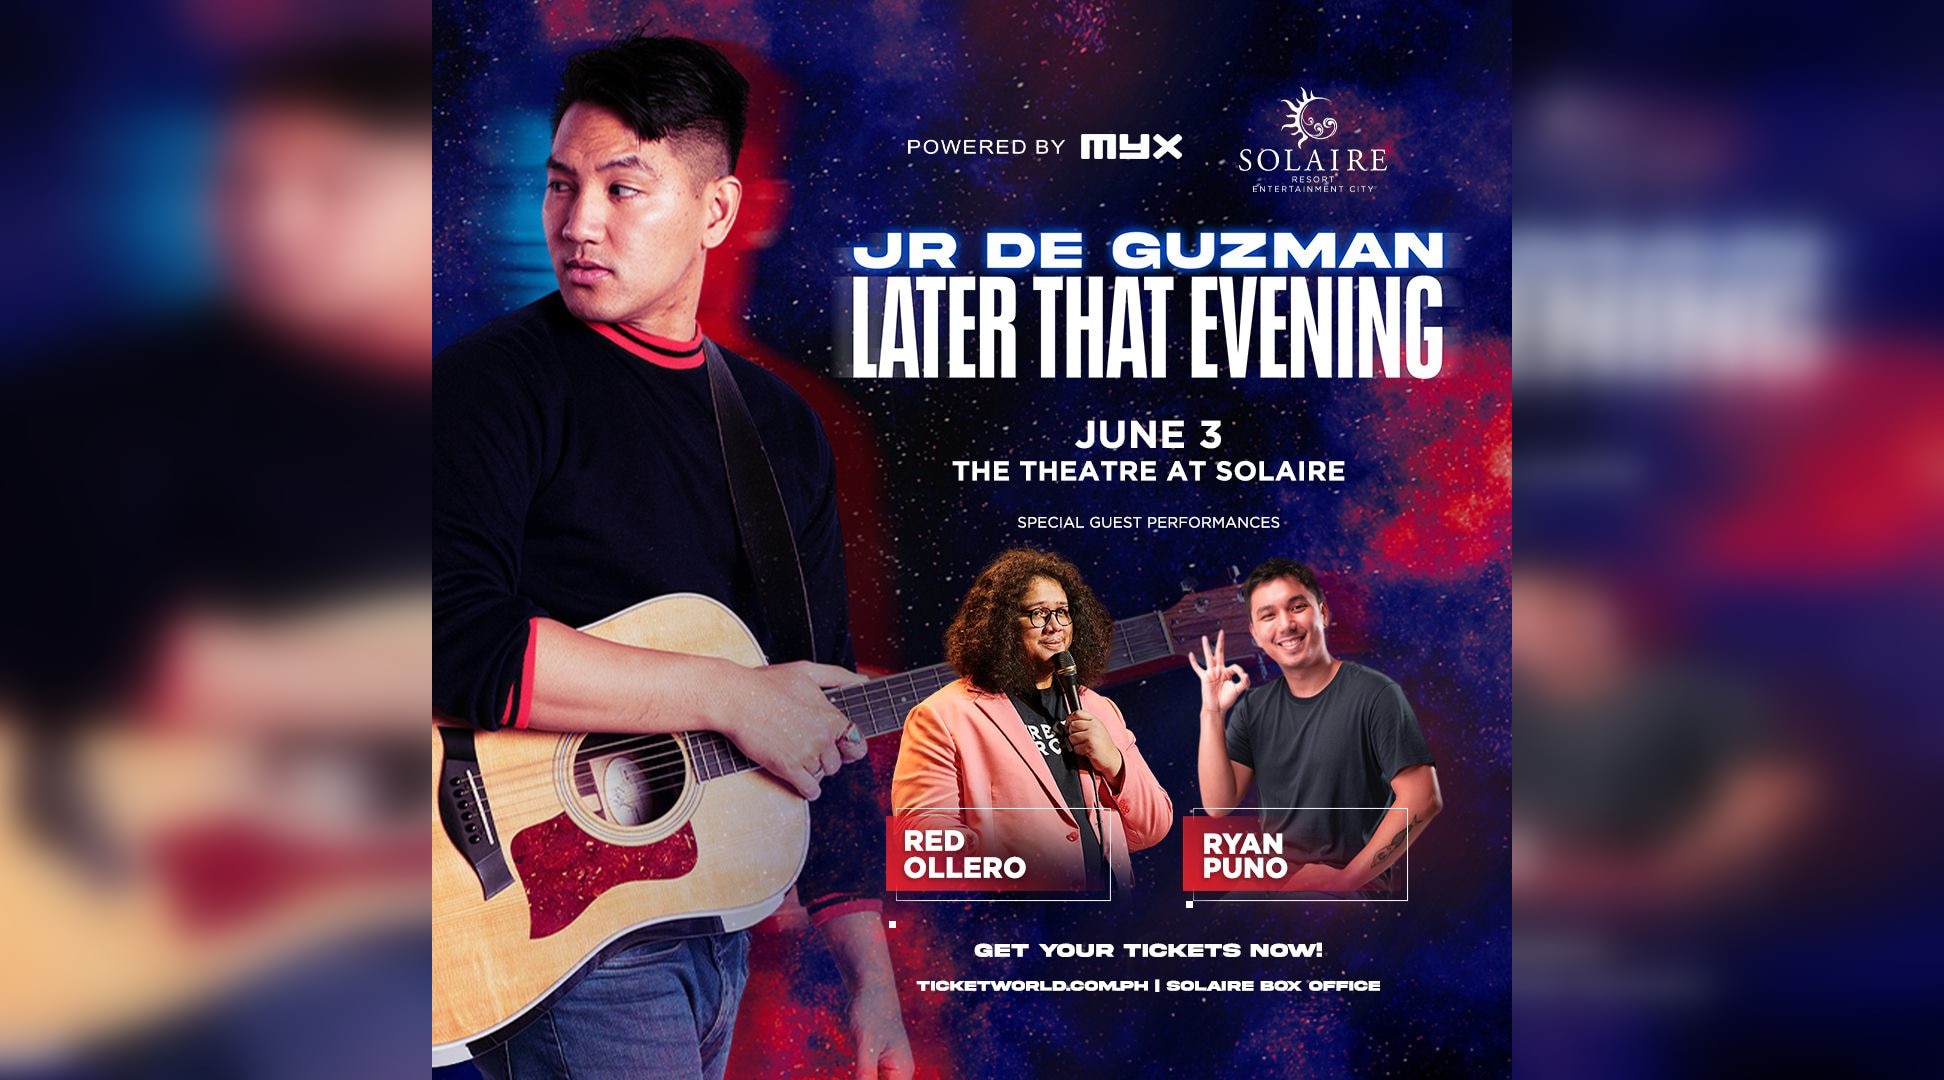 JR de Guzman brings music and comedy onstage in "Later That Evening" show